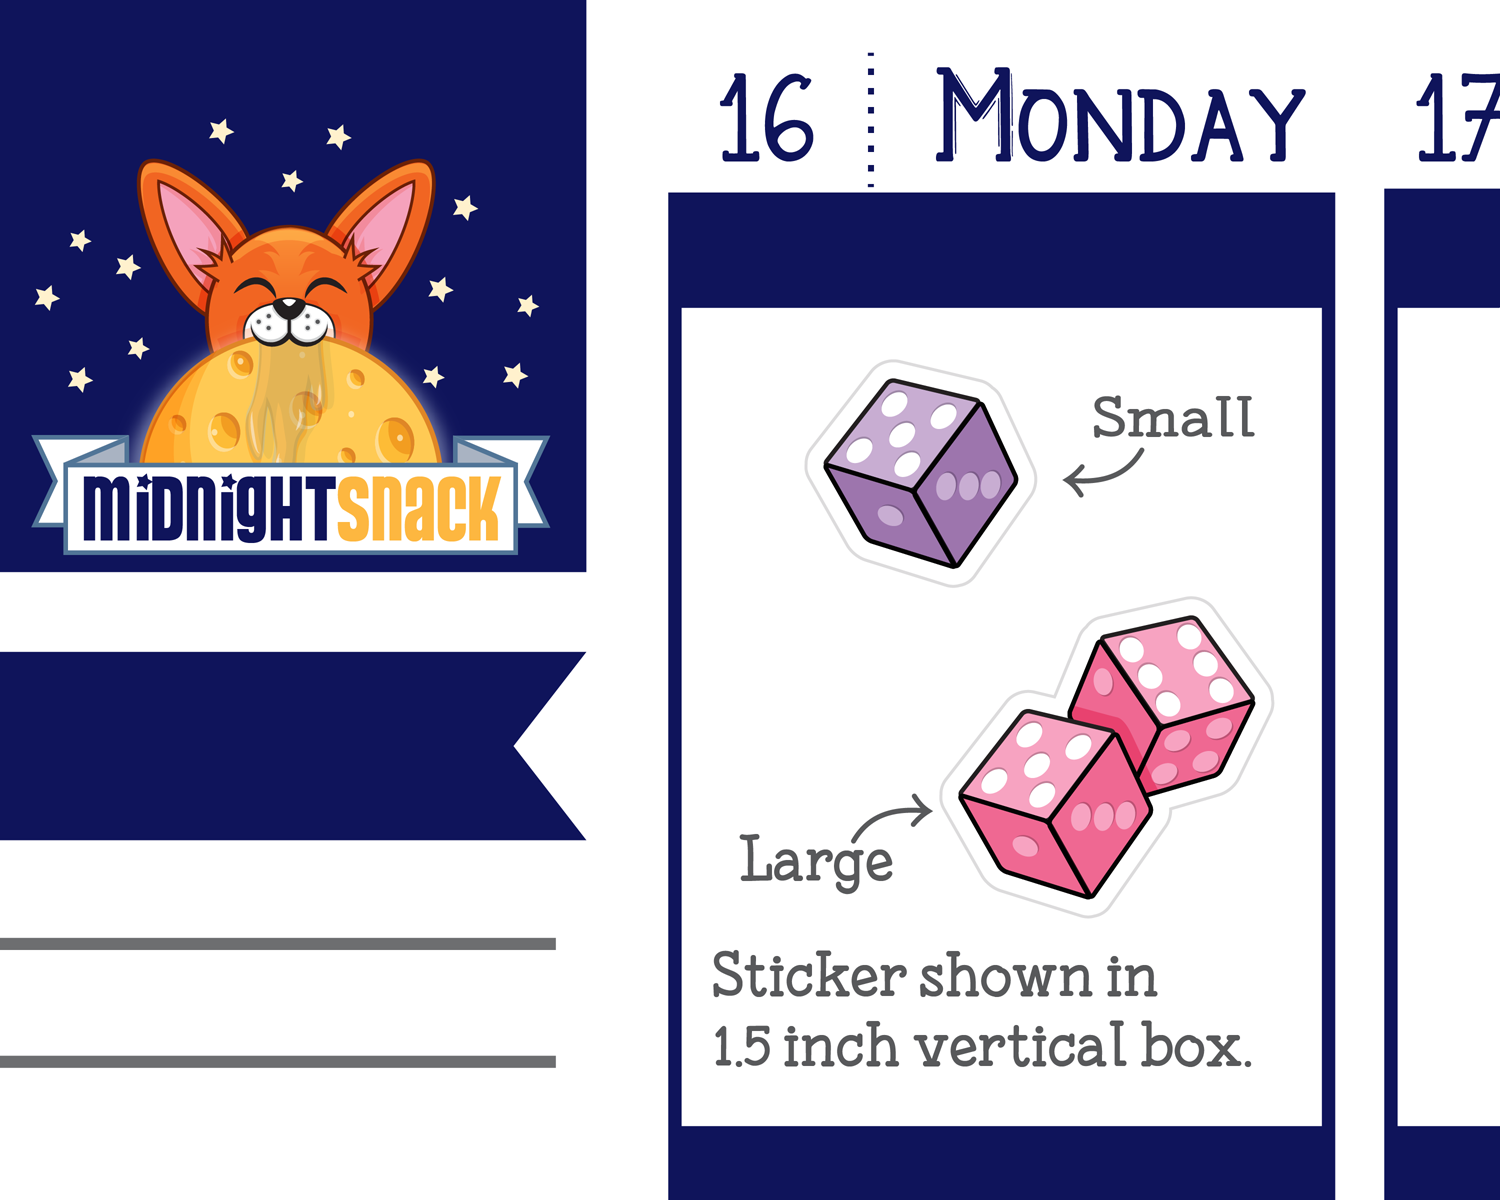 Dice Icon: Fun and Games Planner Stickers